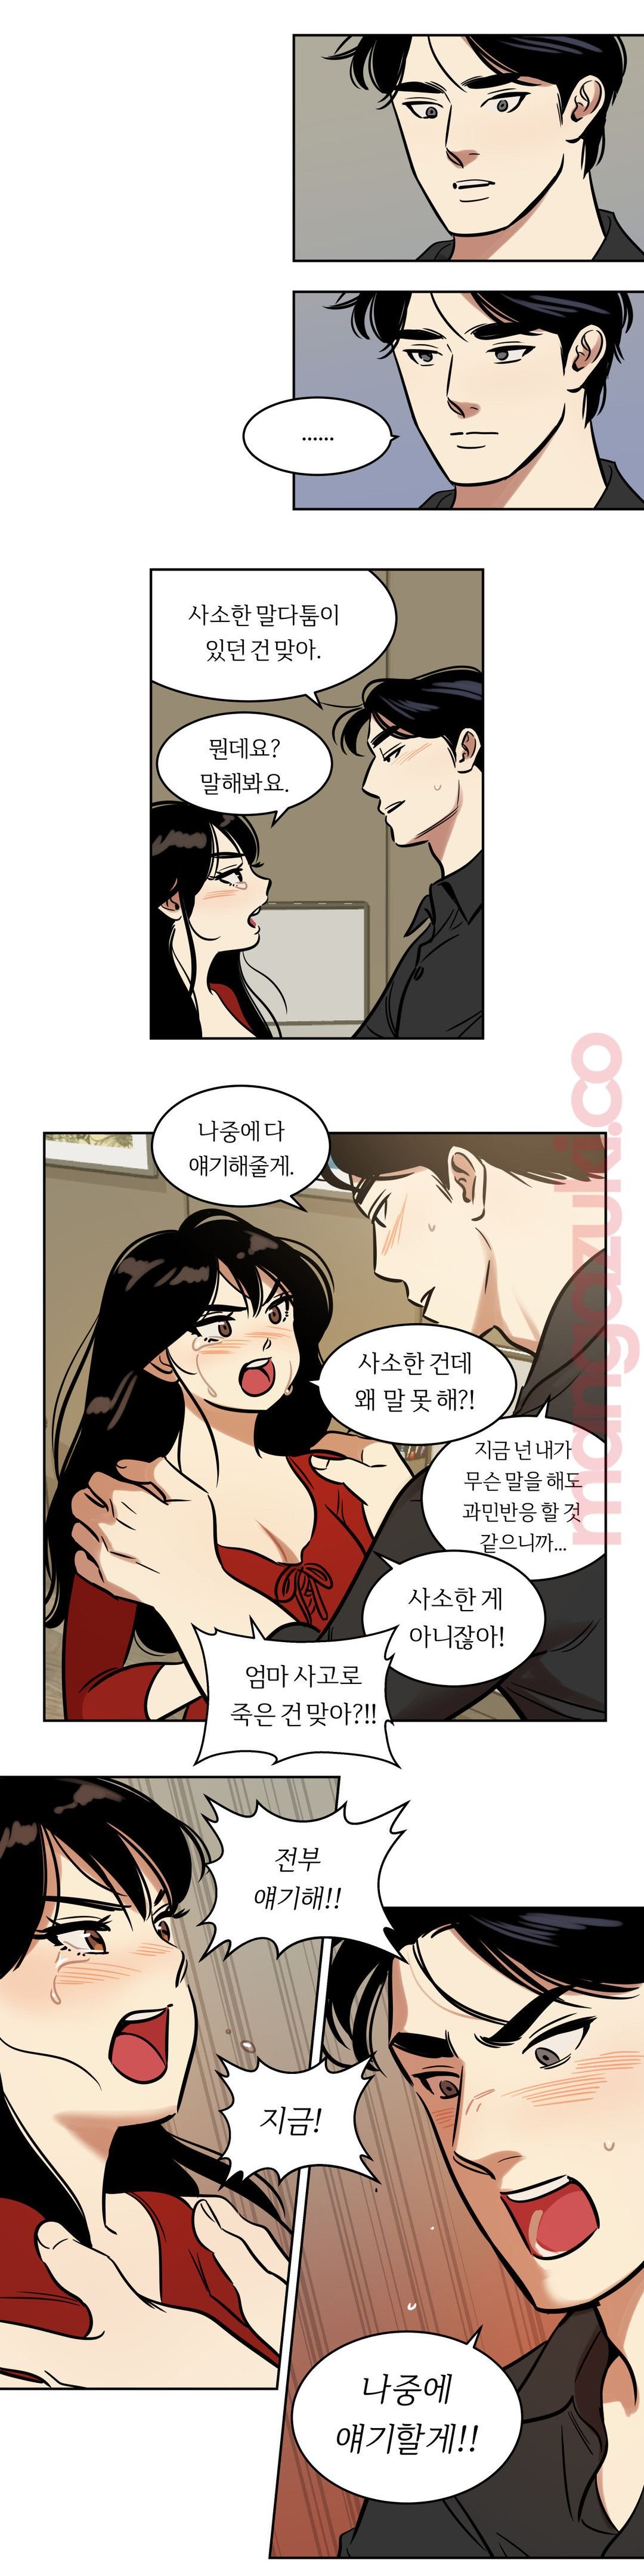 Snowman Raw - Chapter 44 Page 2